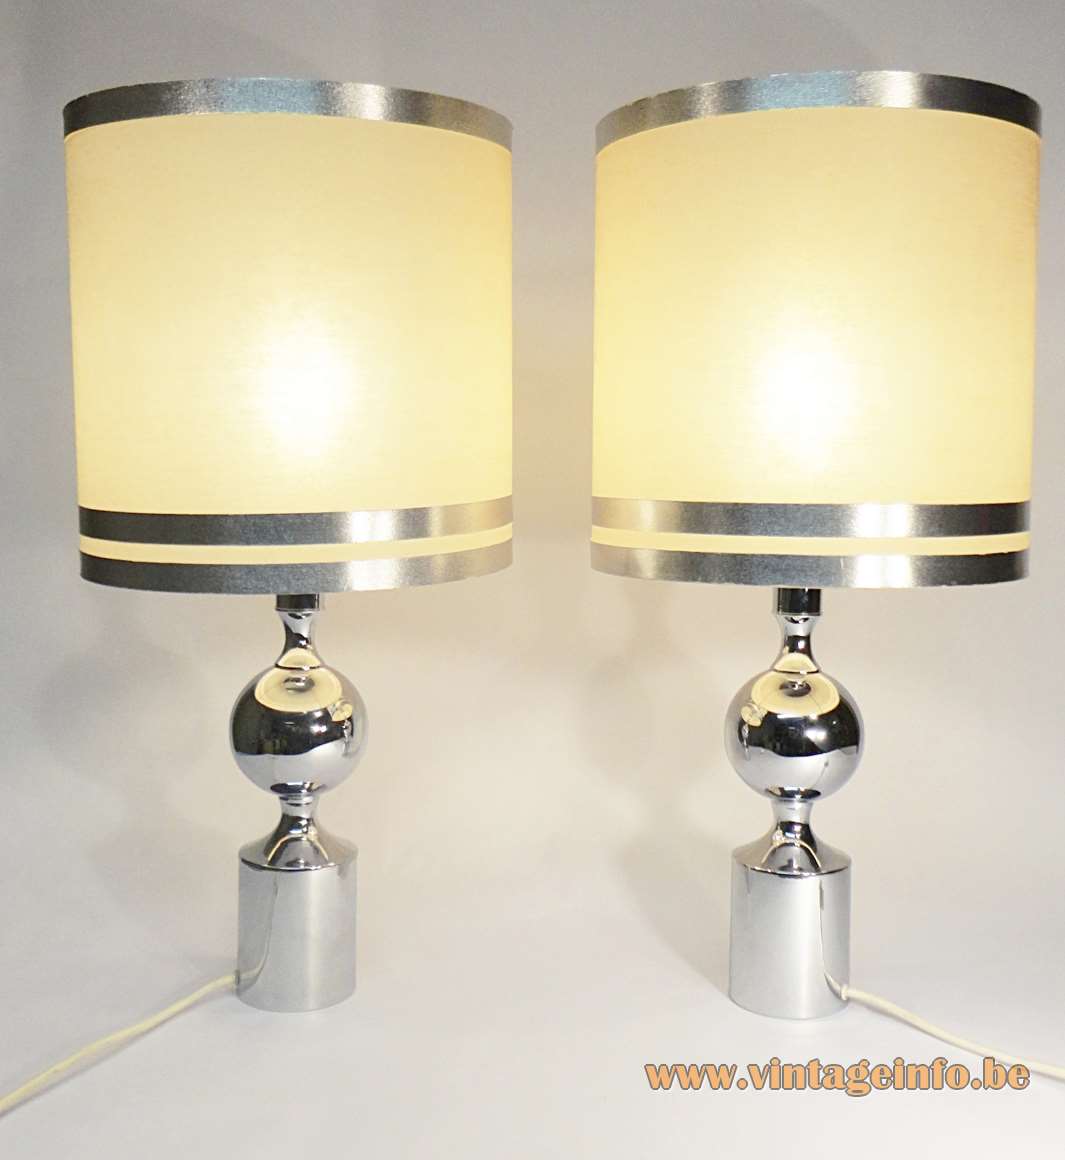 Hustadt-Leuchten chrome table lamps with a round base and globe lampshade with 3 aluminium rings